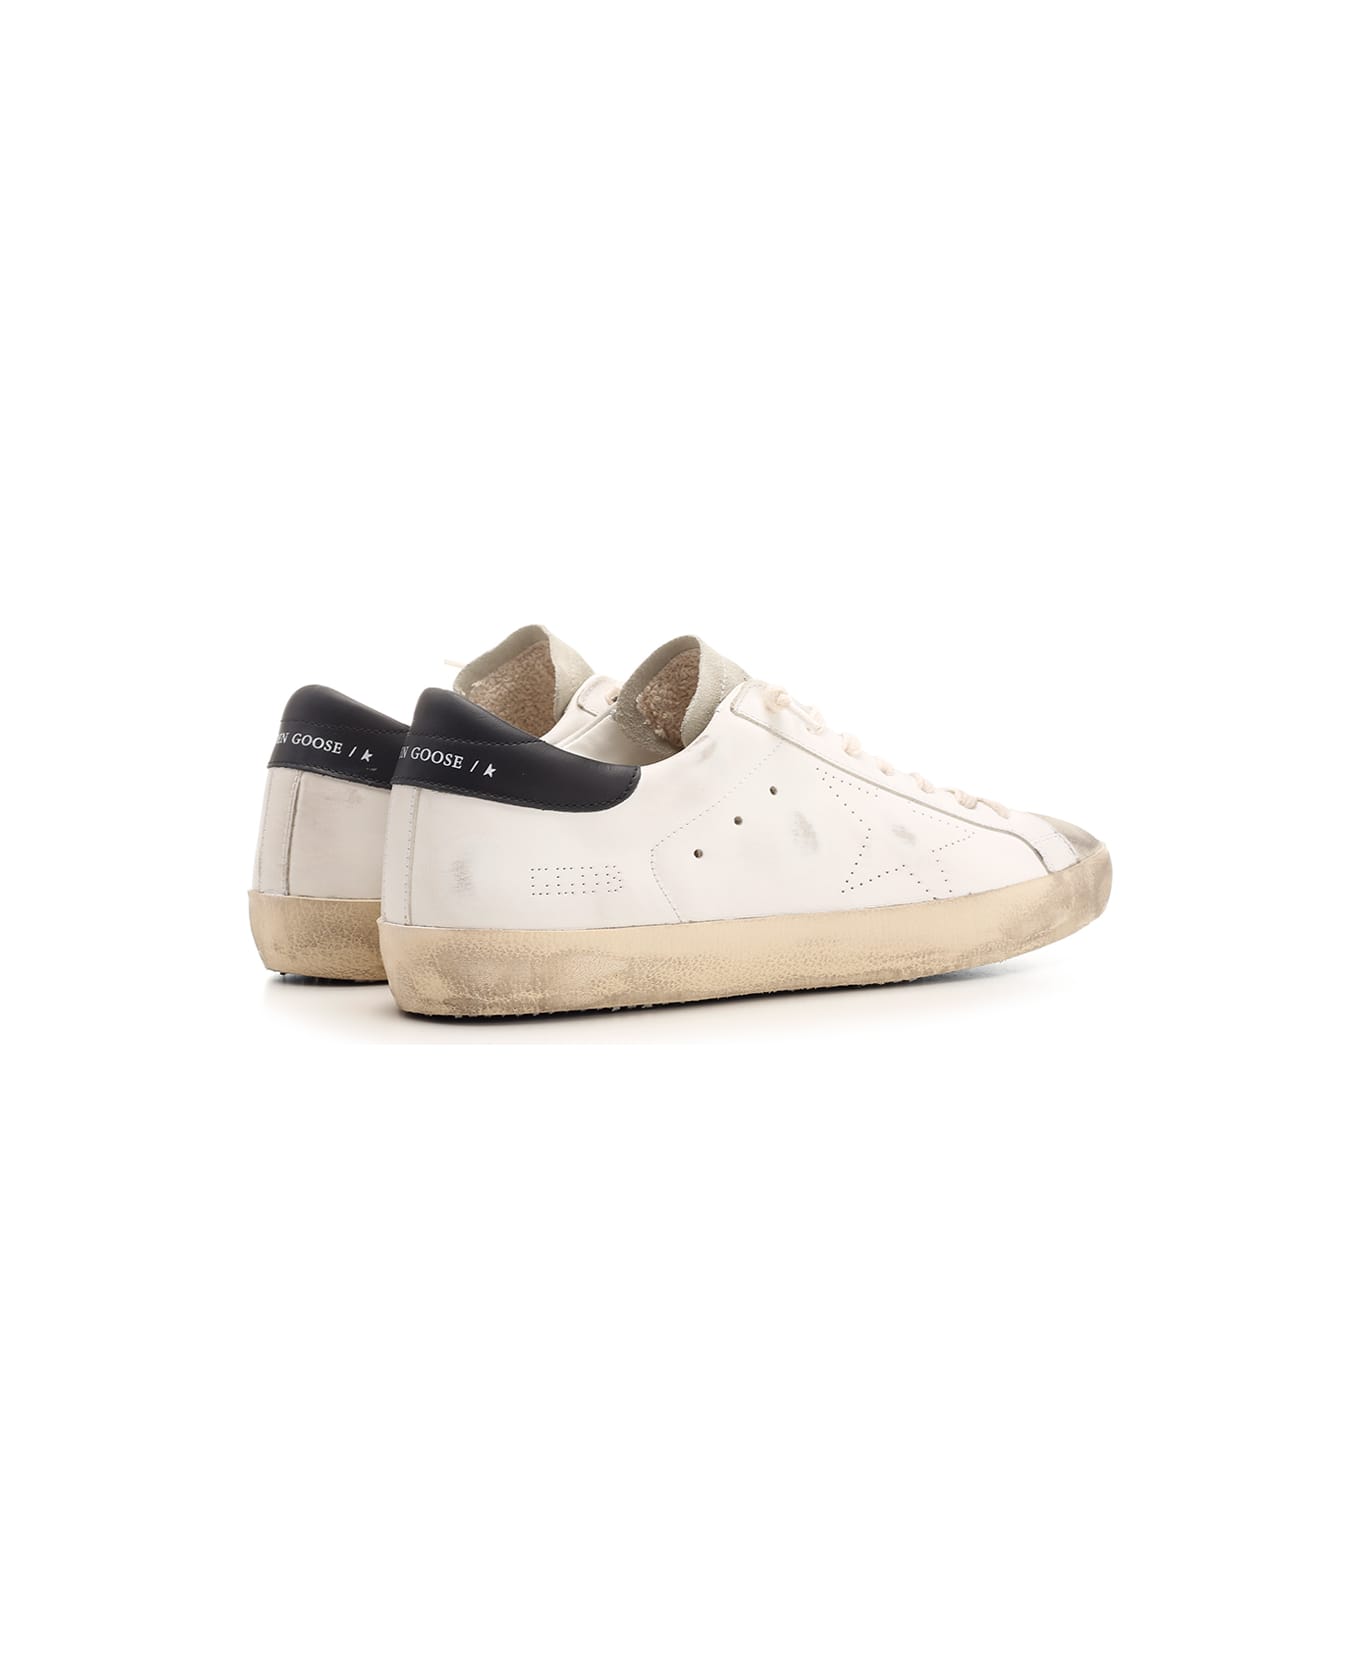 Golden Goose Super-star Leather Low-top Sneakers - White/Ice/Black